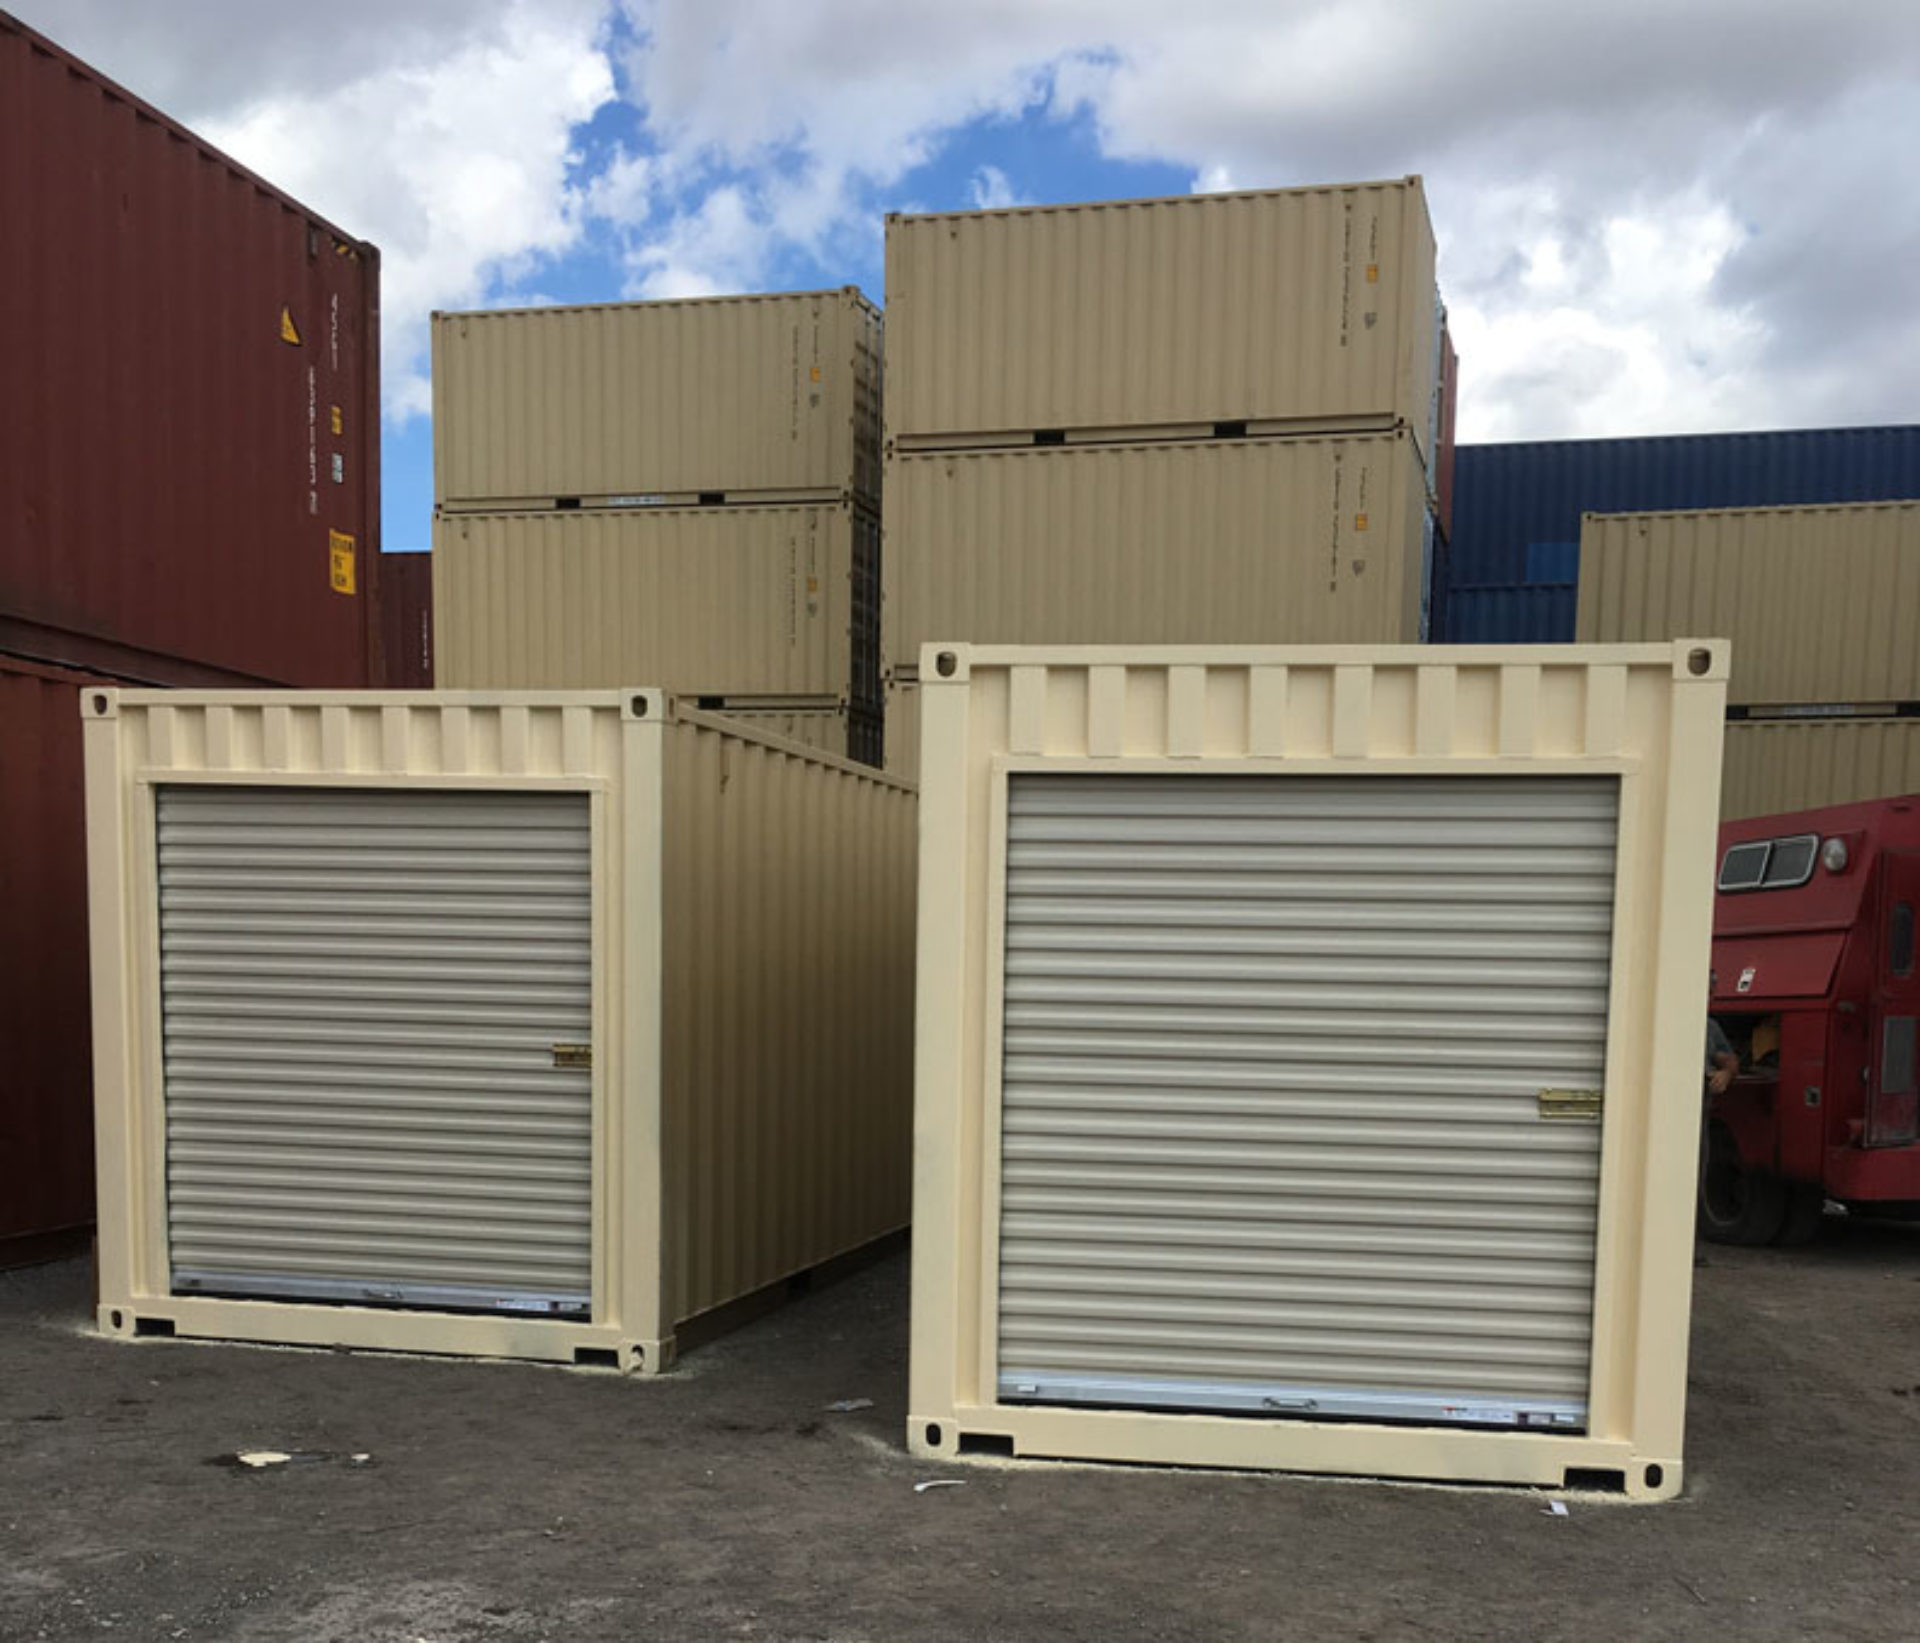 20' Dry Container with Rollup Door - RAVA Group Container Services